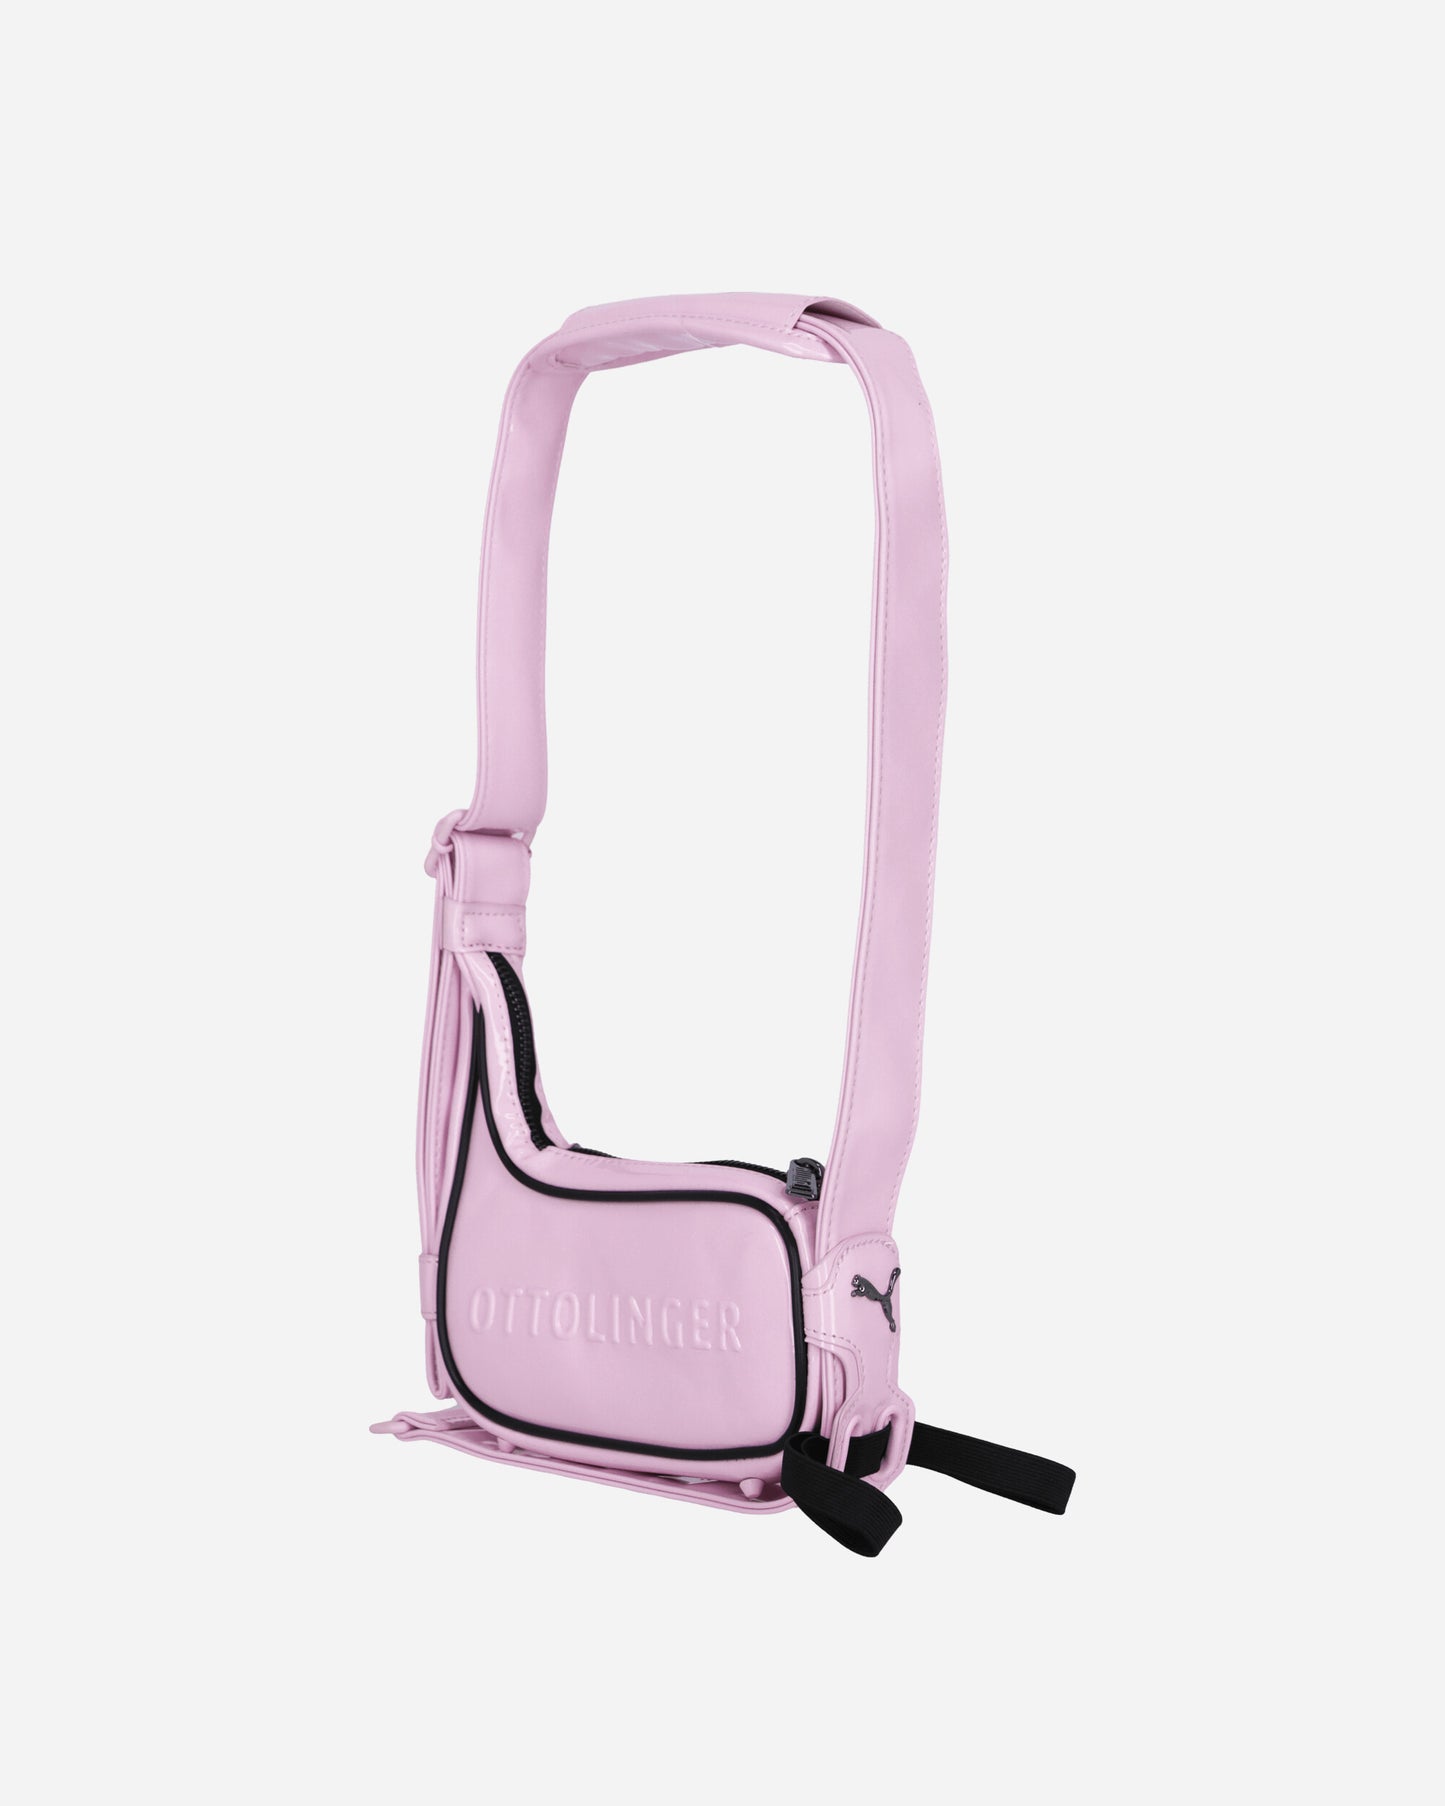 Ottolinger Wmns Puma X Ottolinger Small Bag Whisp Of Pink Whissp Bags and Backpacks Shoulder Bags 090315  02